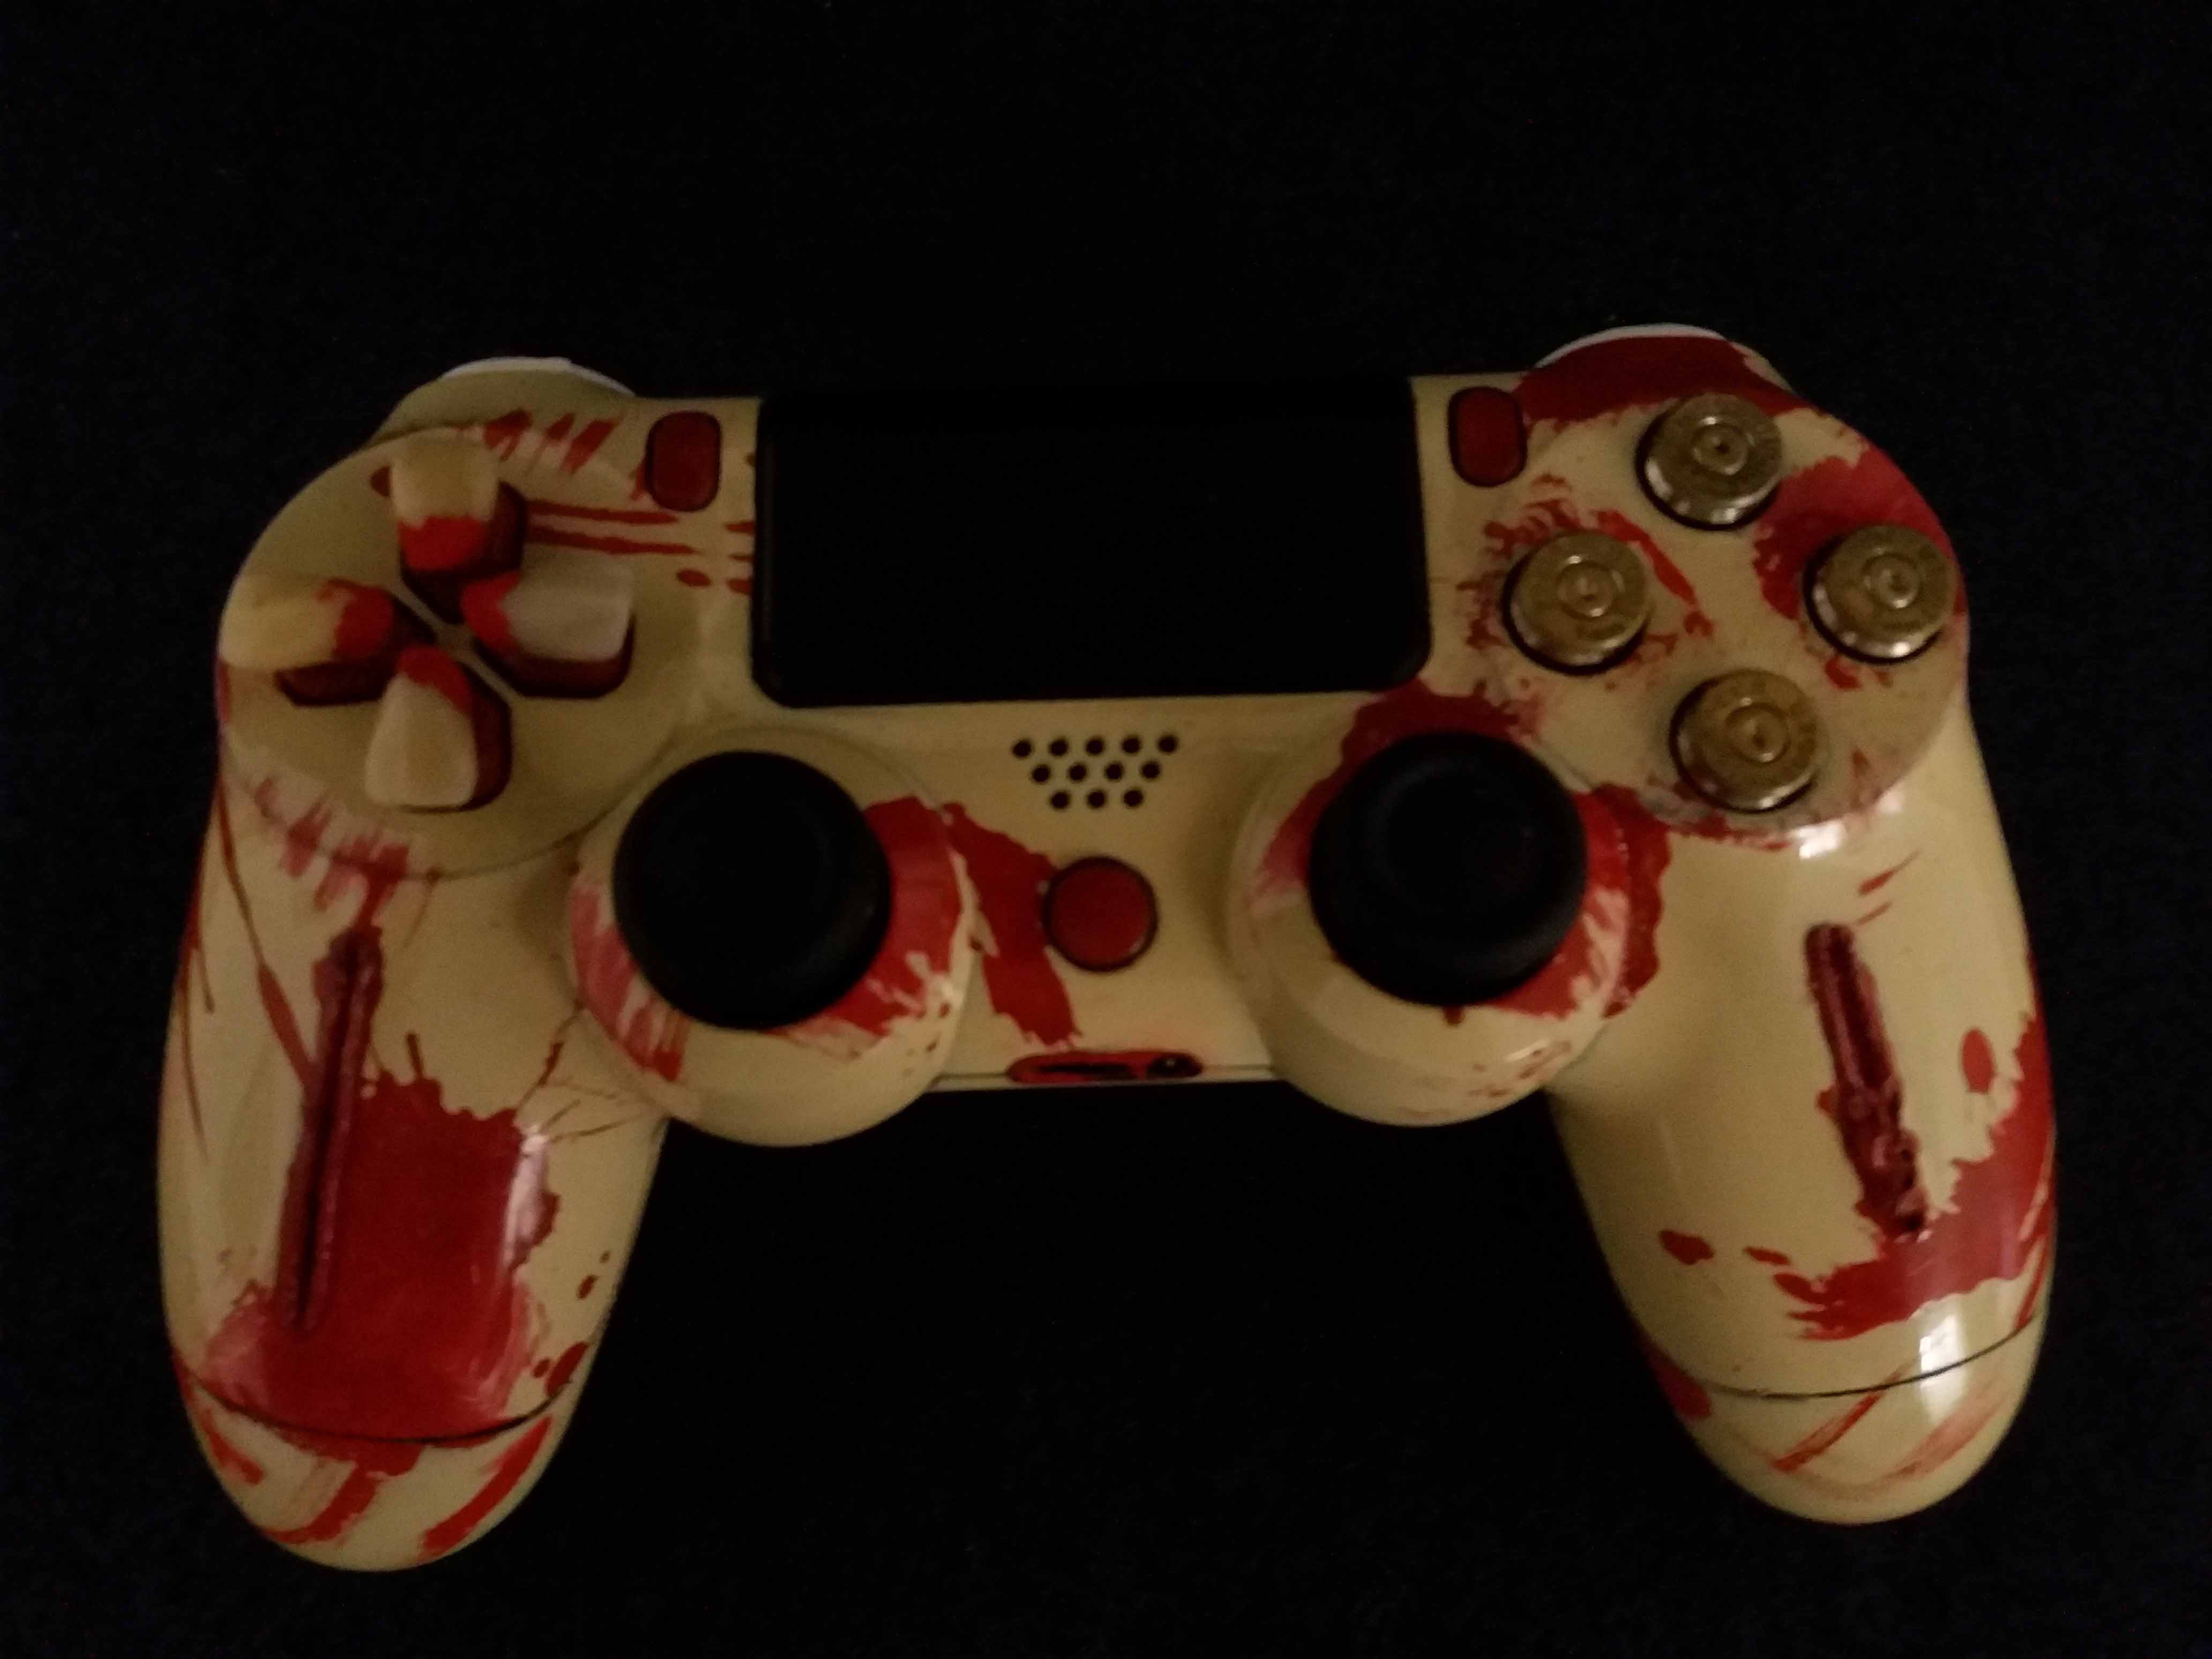 resident evil 5 pc ps4 controller